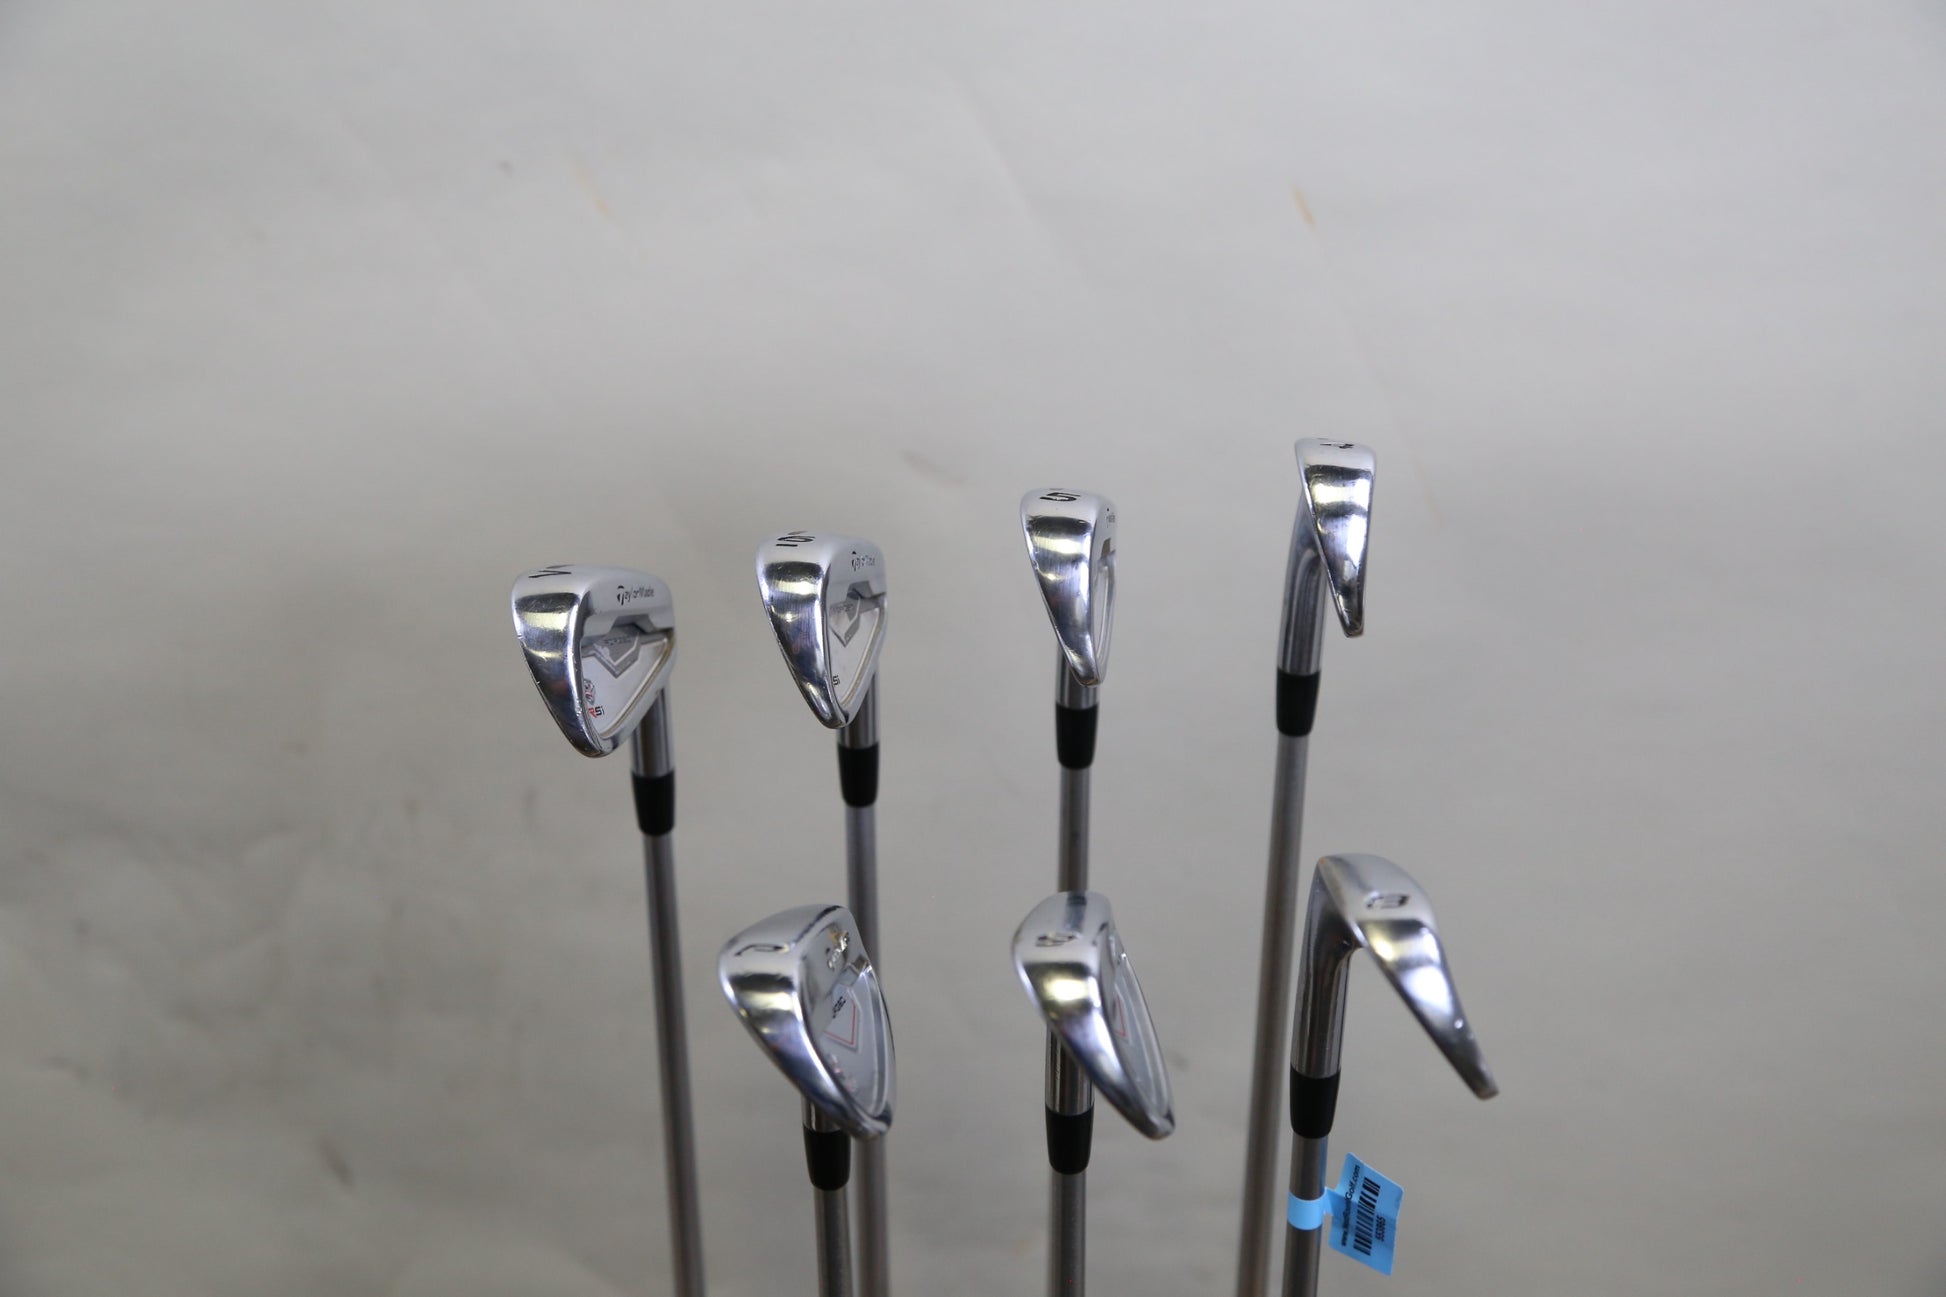 Used TaylorMade RSi 1 Iron Set - Right-Handed - 4-PW - Extra Stiff Flex-Next Round